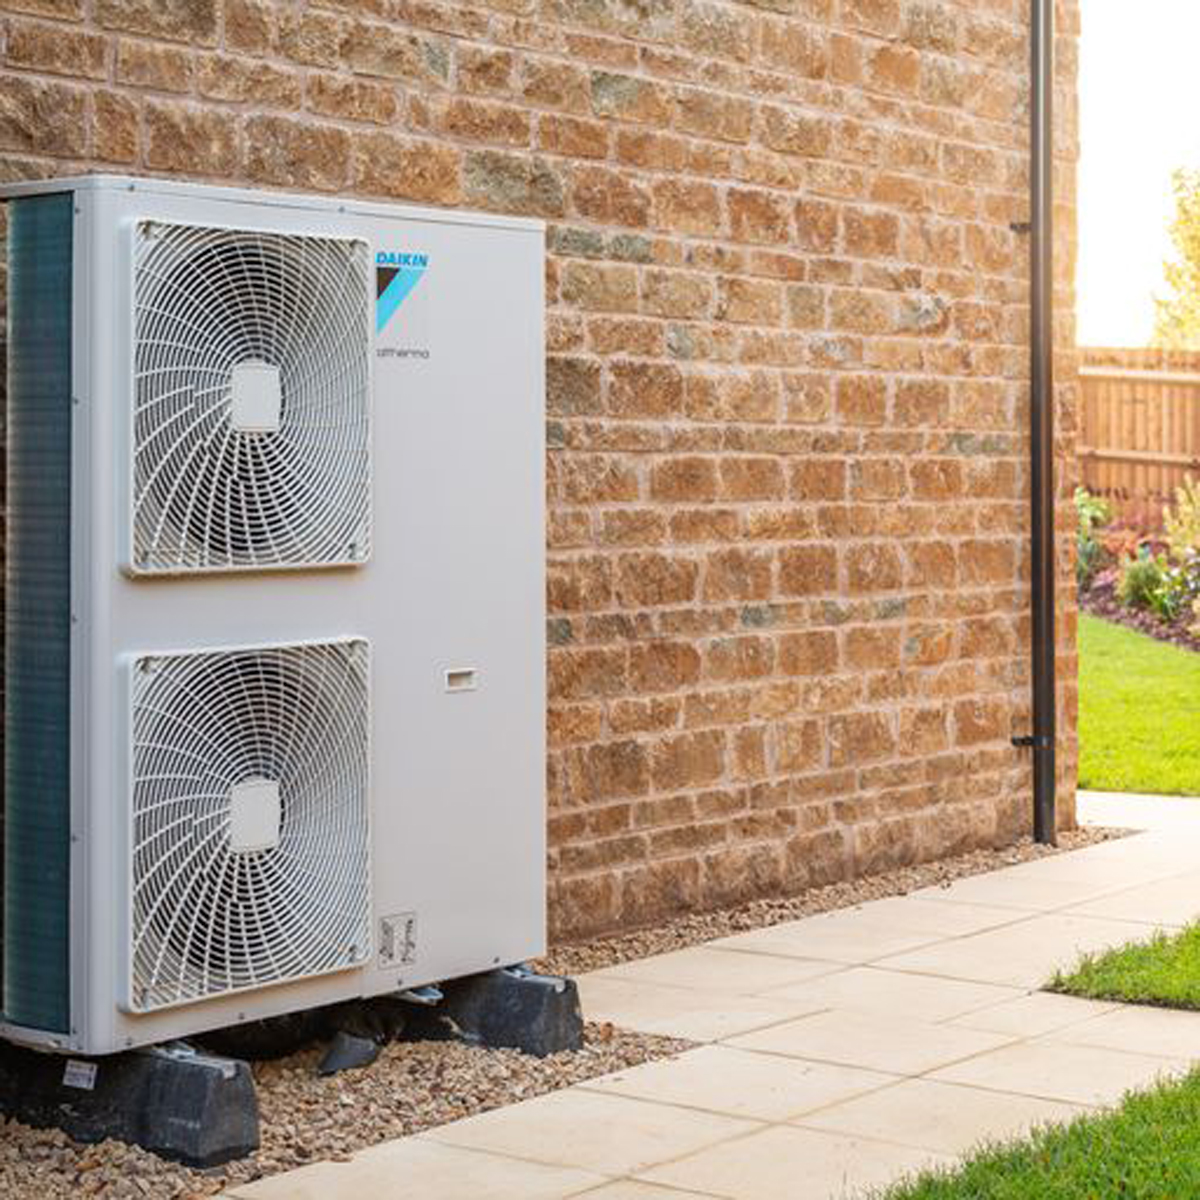 Spitfire Homes survey has found that new home buyers are not looking for air source heat pumps